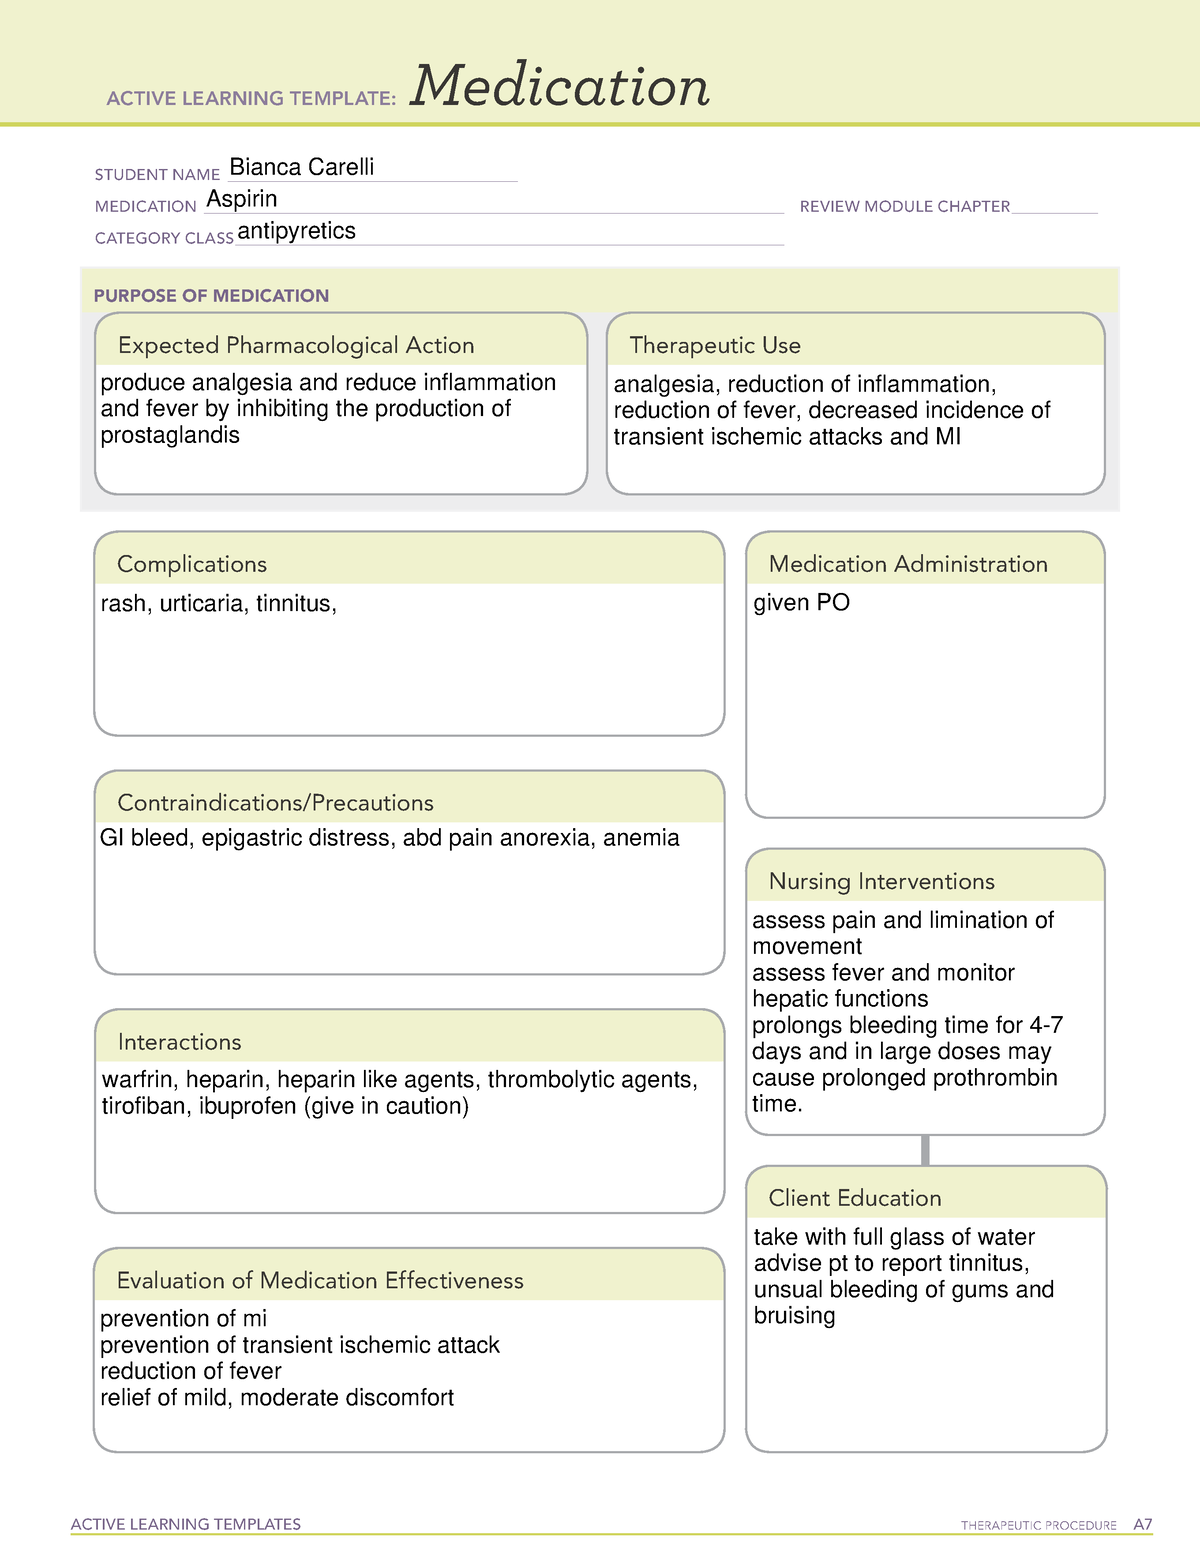 Aspirin Medication Template ACTIVE LEARNING TEMPLATES THERAPEUTIC